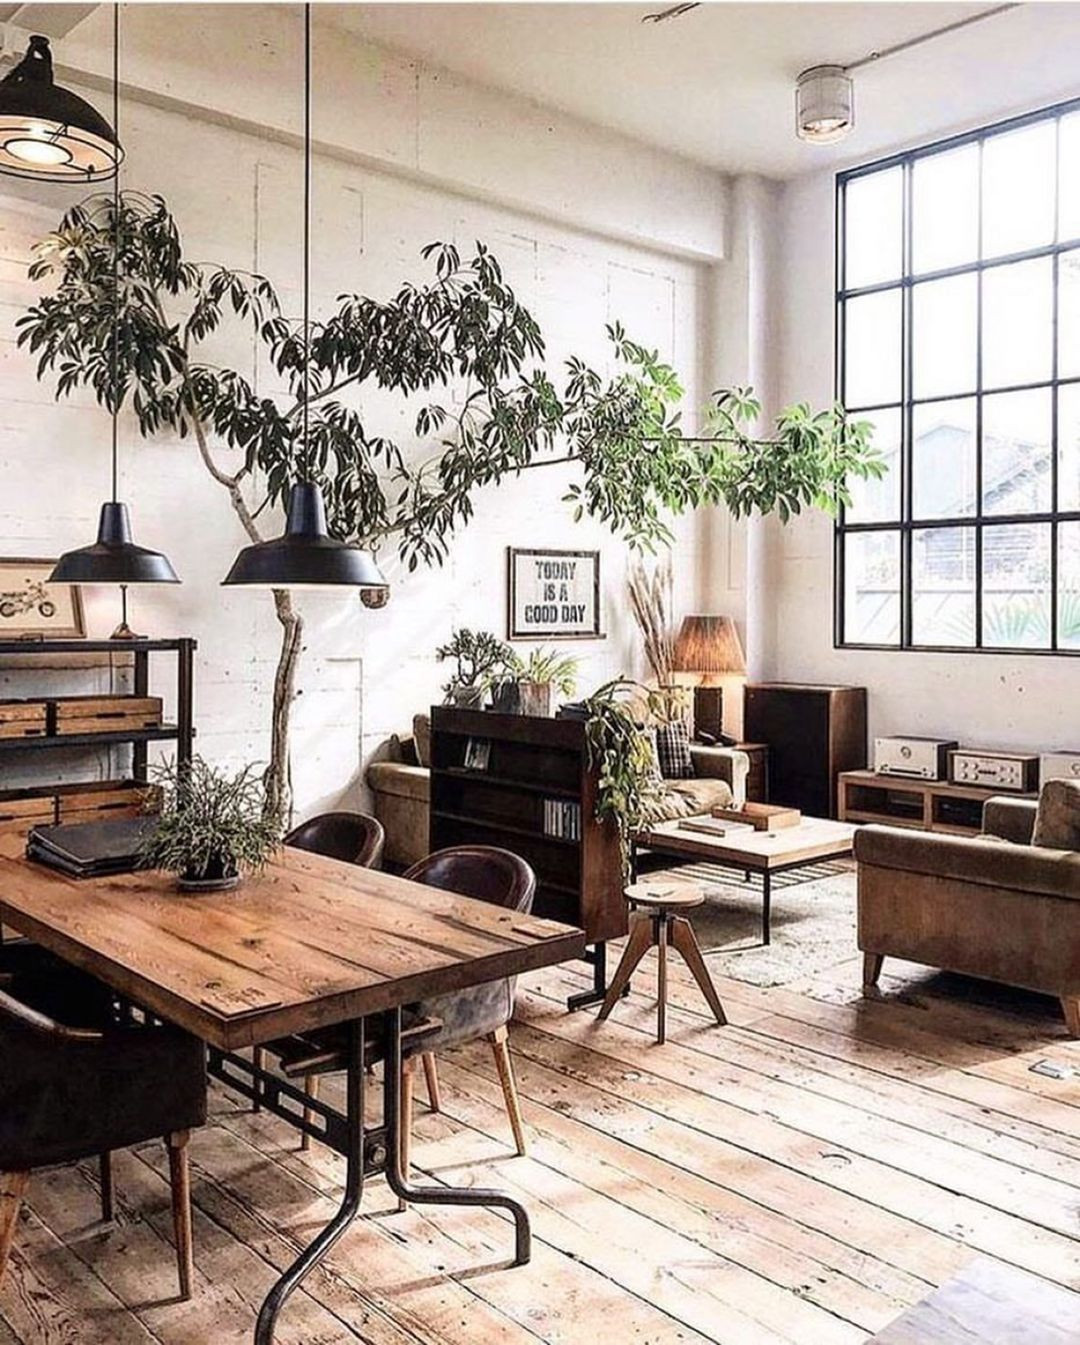 Rustic Industrial Living Room
 25 Gorgeous Industrial Living Room Ideas for 2020